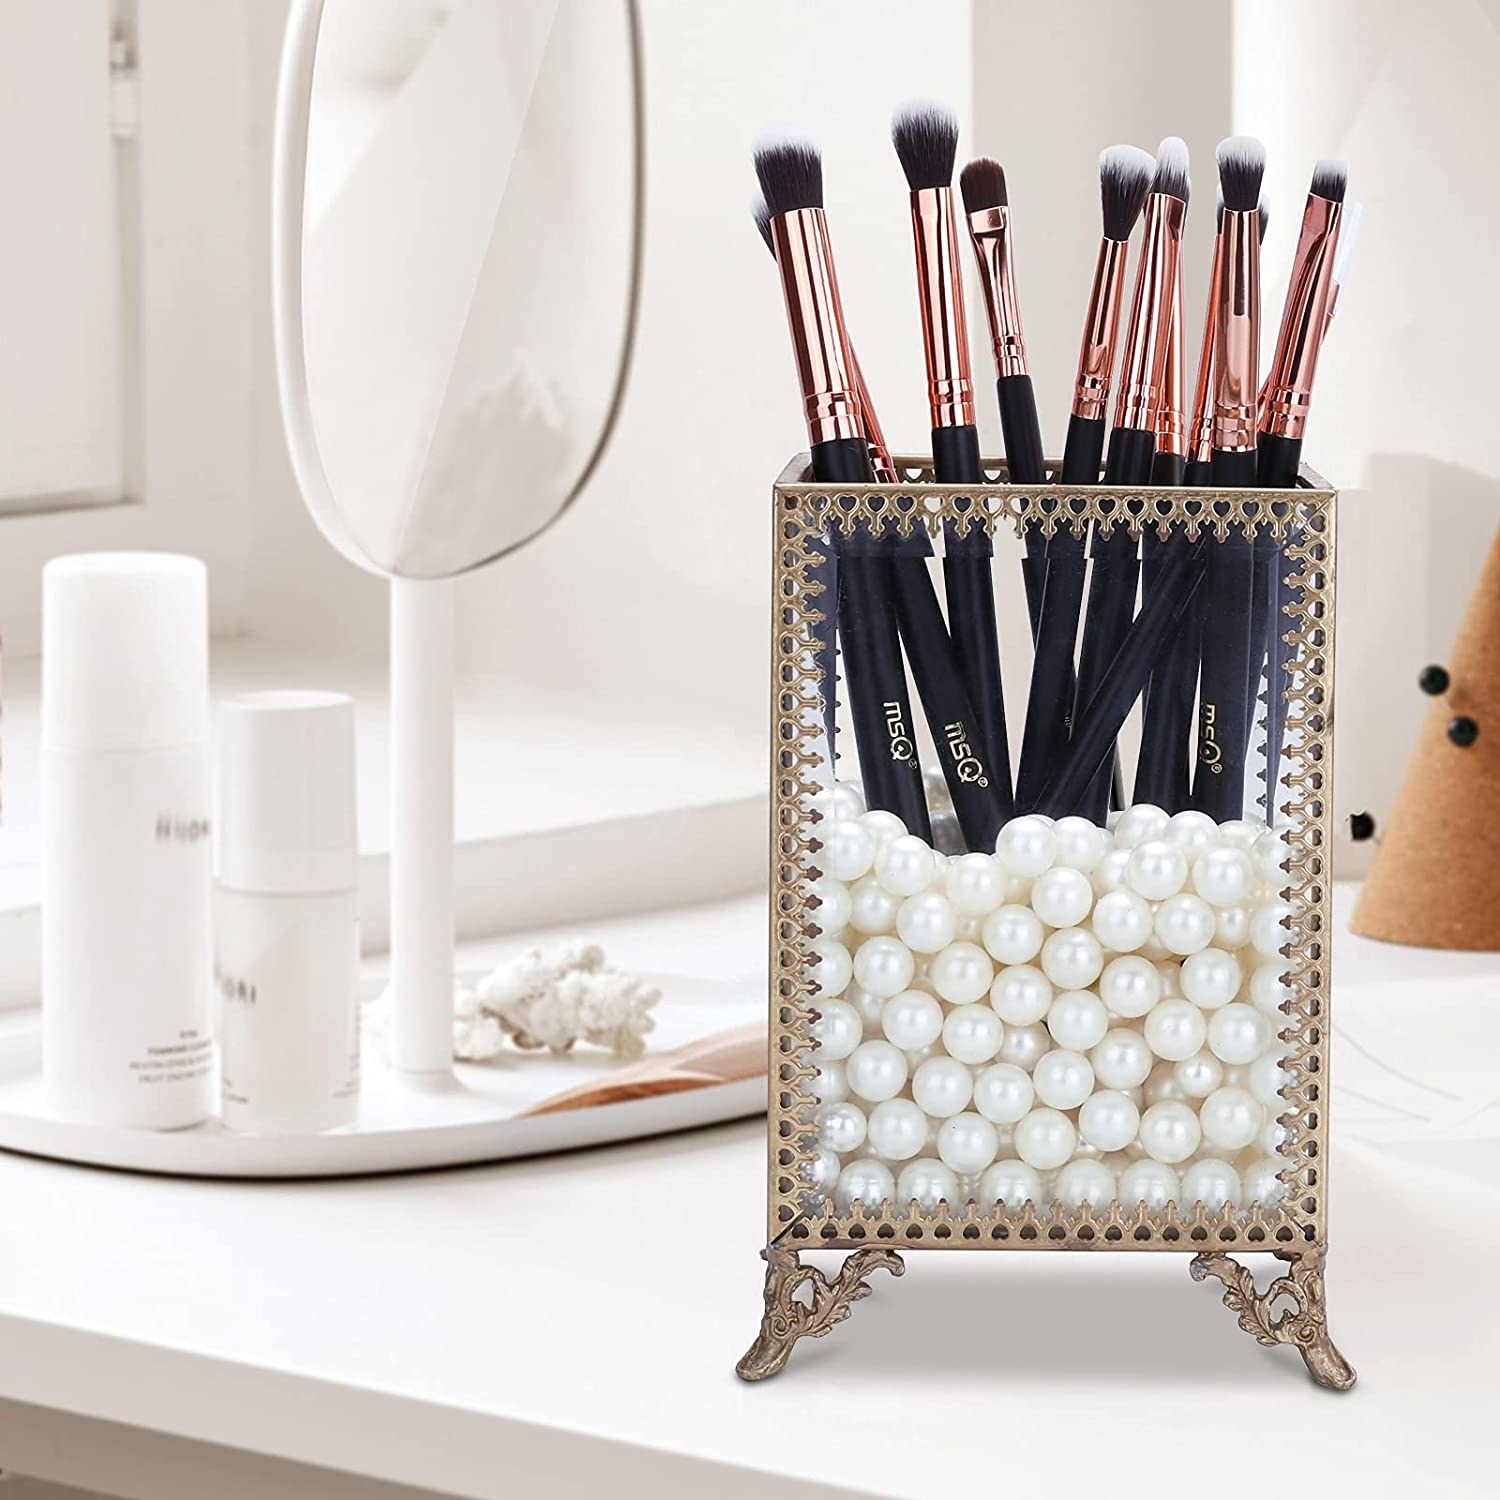 the brushes in a holder with pearl balls